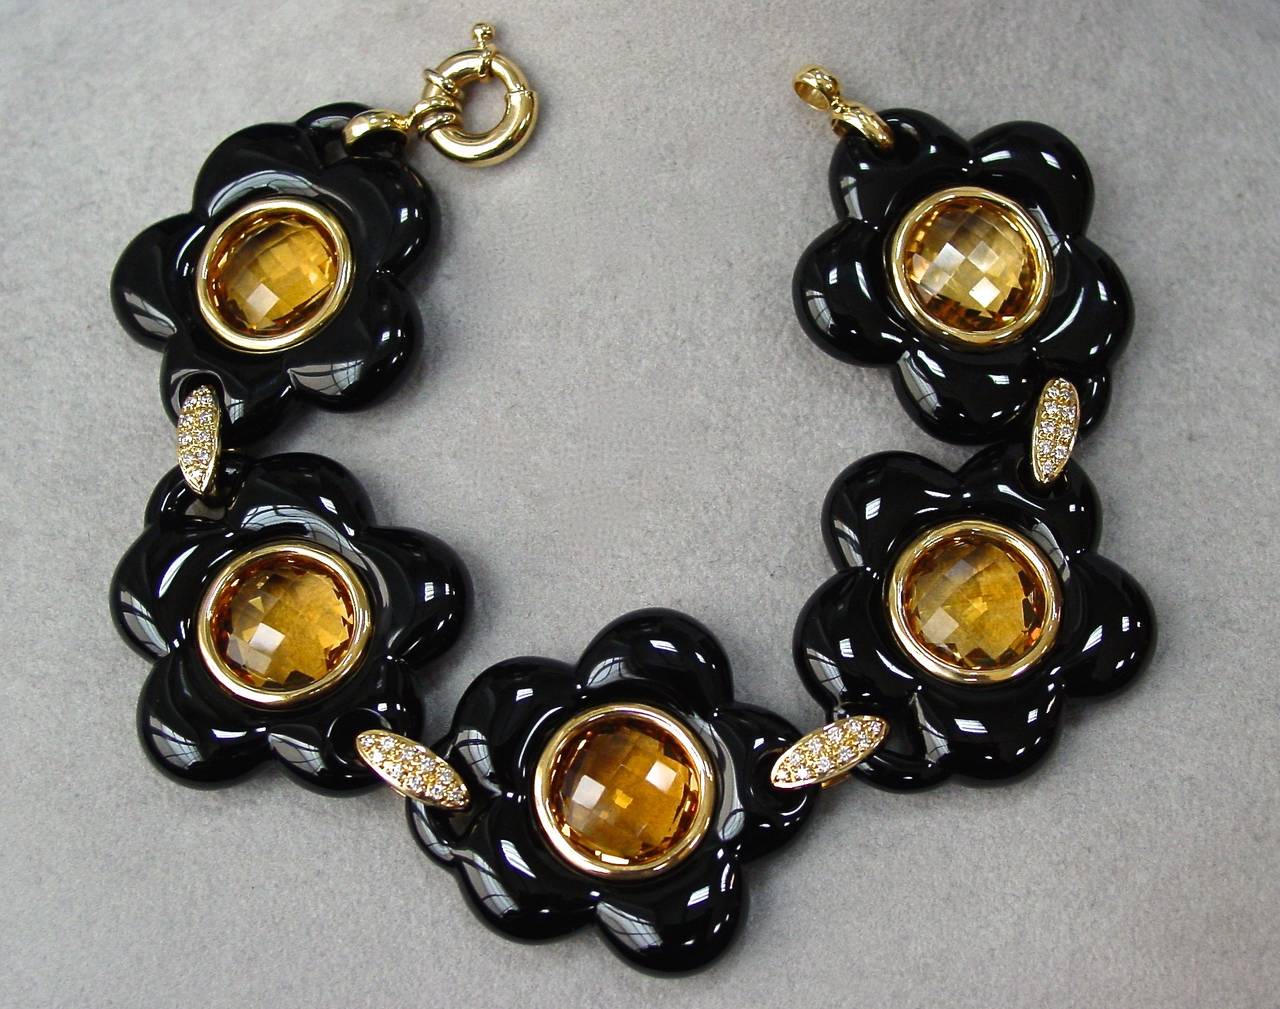 A wonderfully stylish faceted citrine, carved onyx and diamond bracelet mounted in 18 karat yellow gold. Featuring 5 onyx and citrine floral sections connected by  4 diamond links weighing approximately .40 carats.